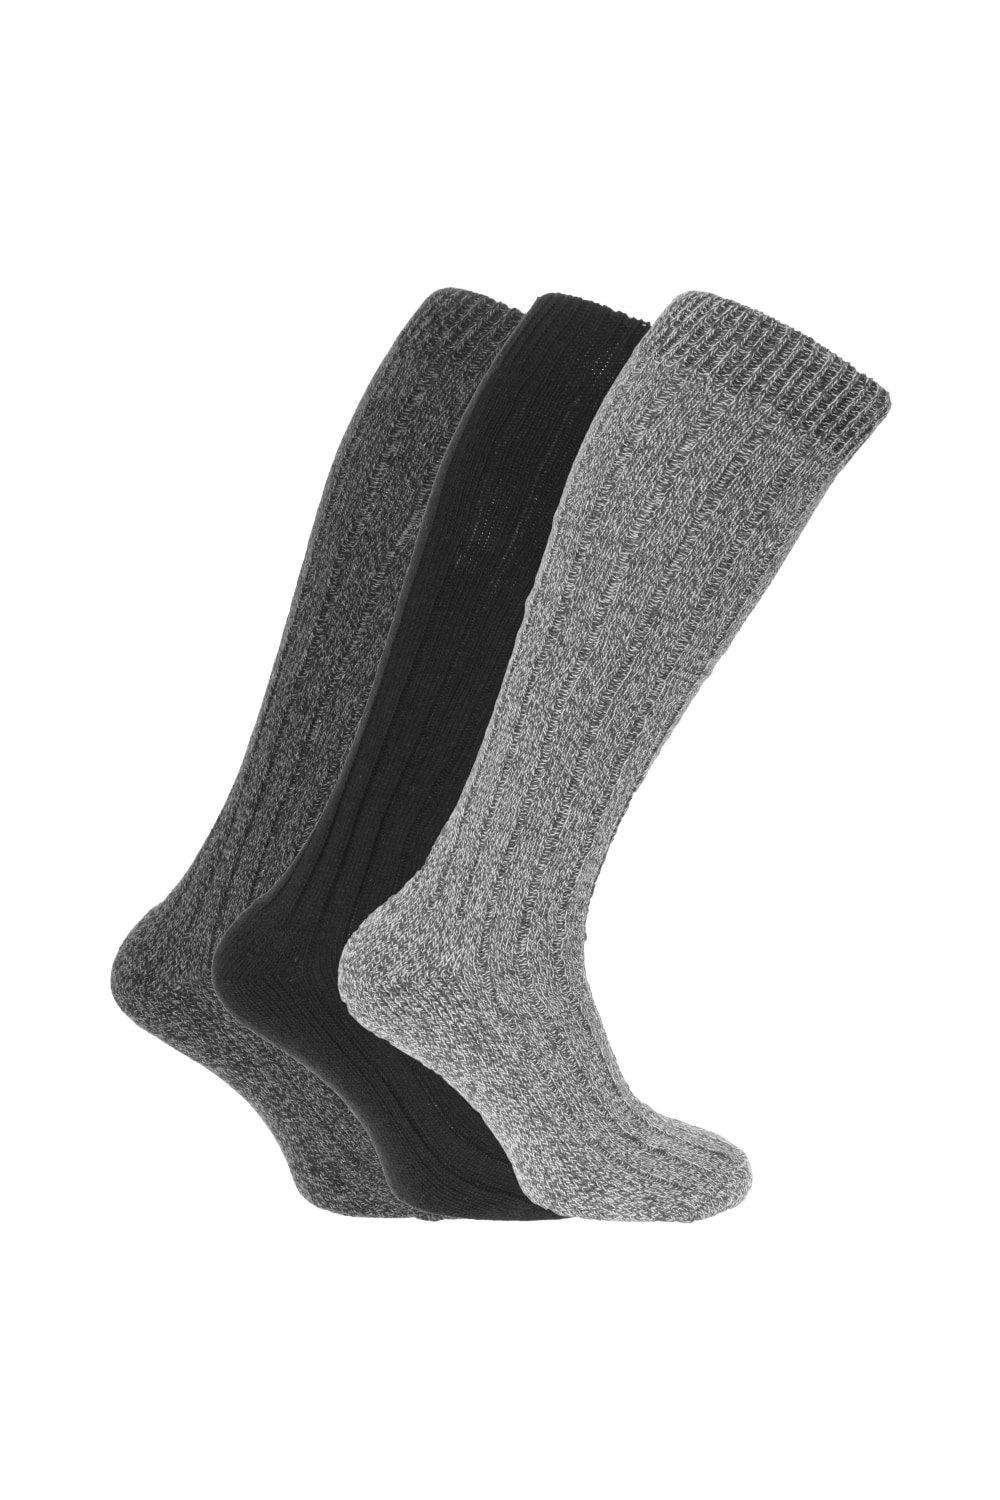 Wool Blend Long Length Socks With Padded Sole (Pack Of 3)